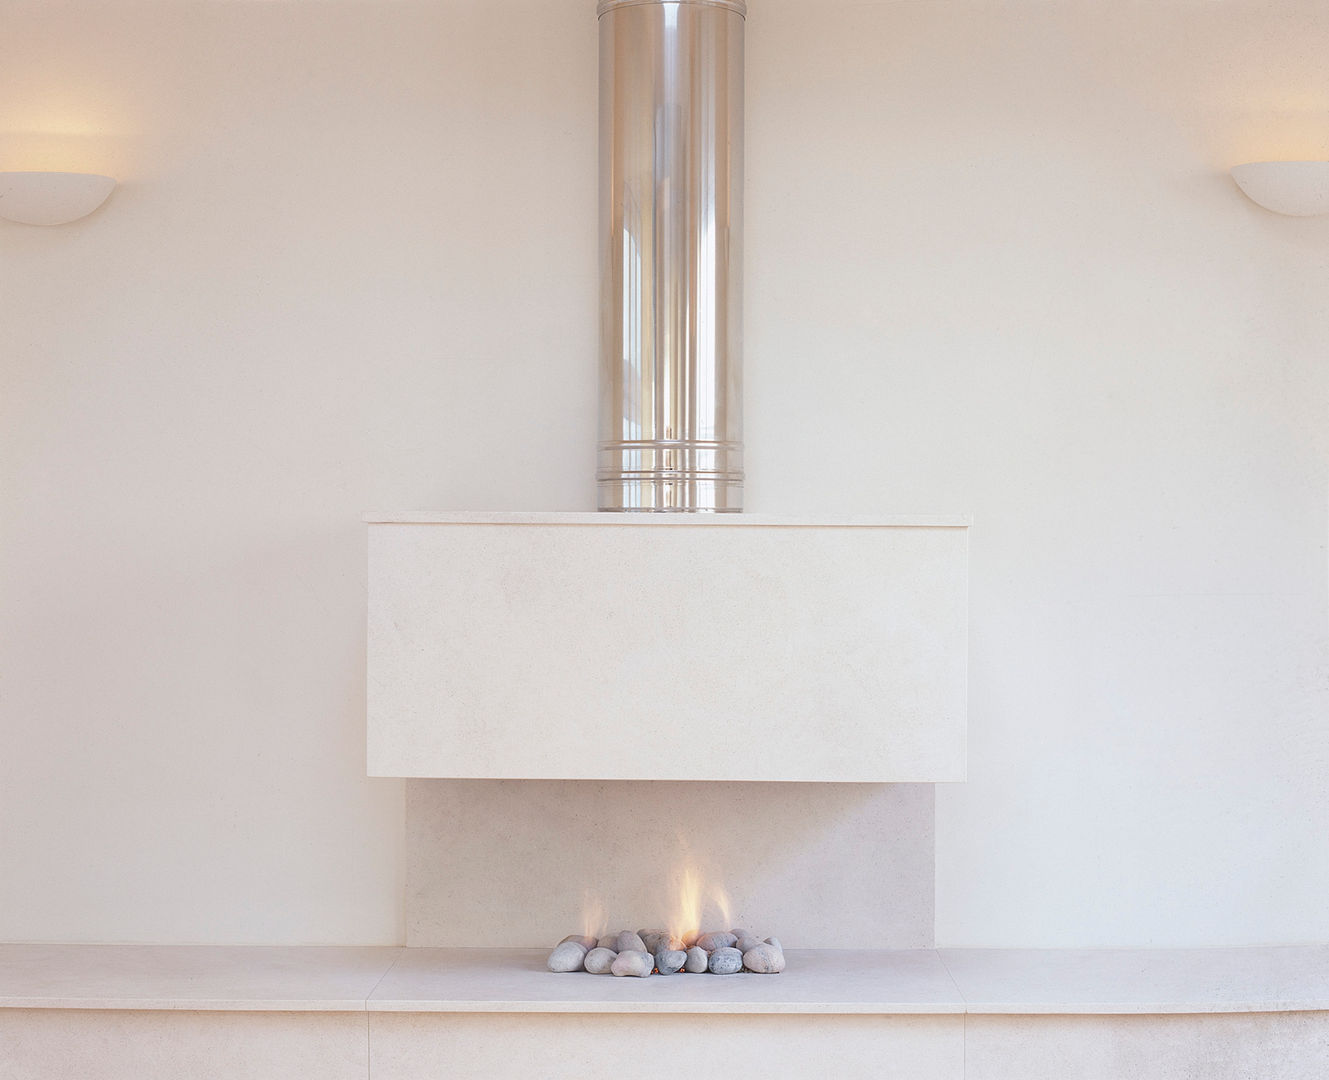 Bespoke Fireplaces: Best architects and designers in the UK, The Platonic Fireplace Company The Platonic Fireplace Company Salas de estar modernas